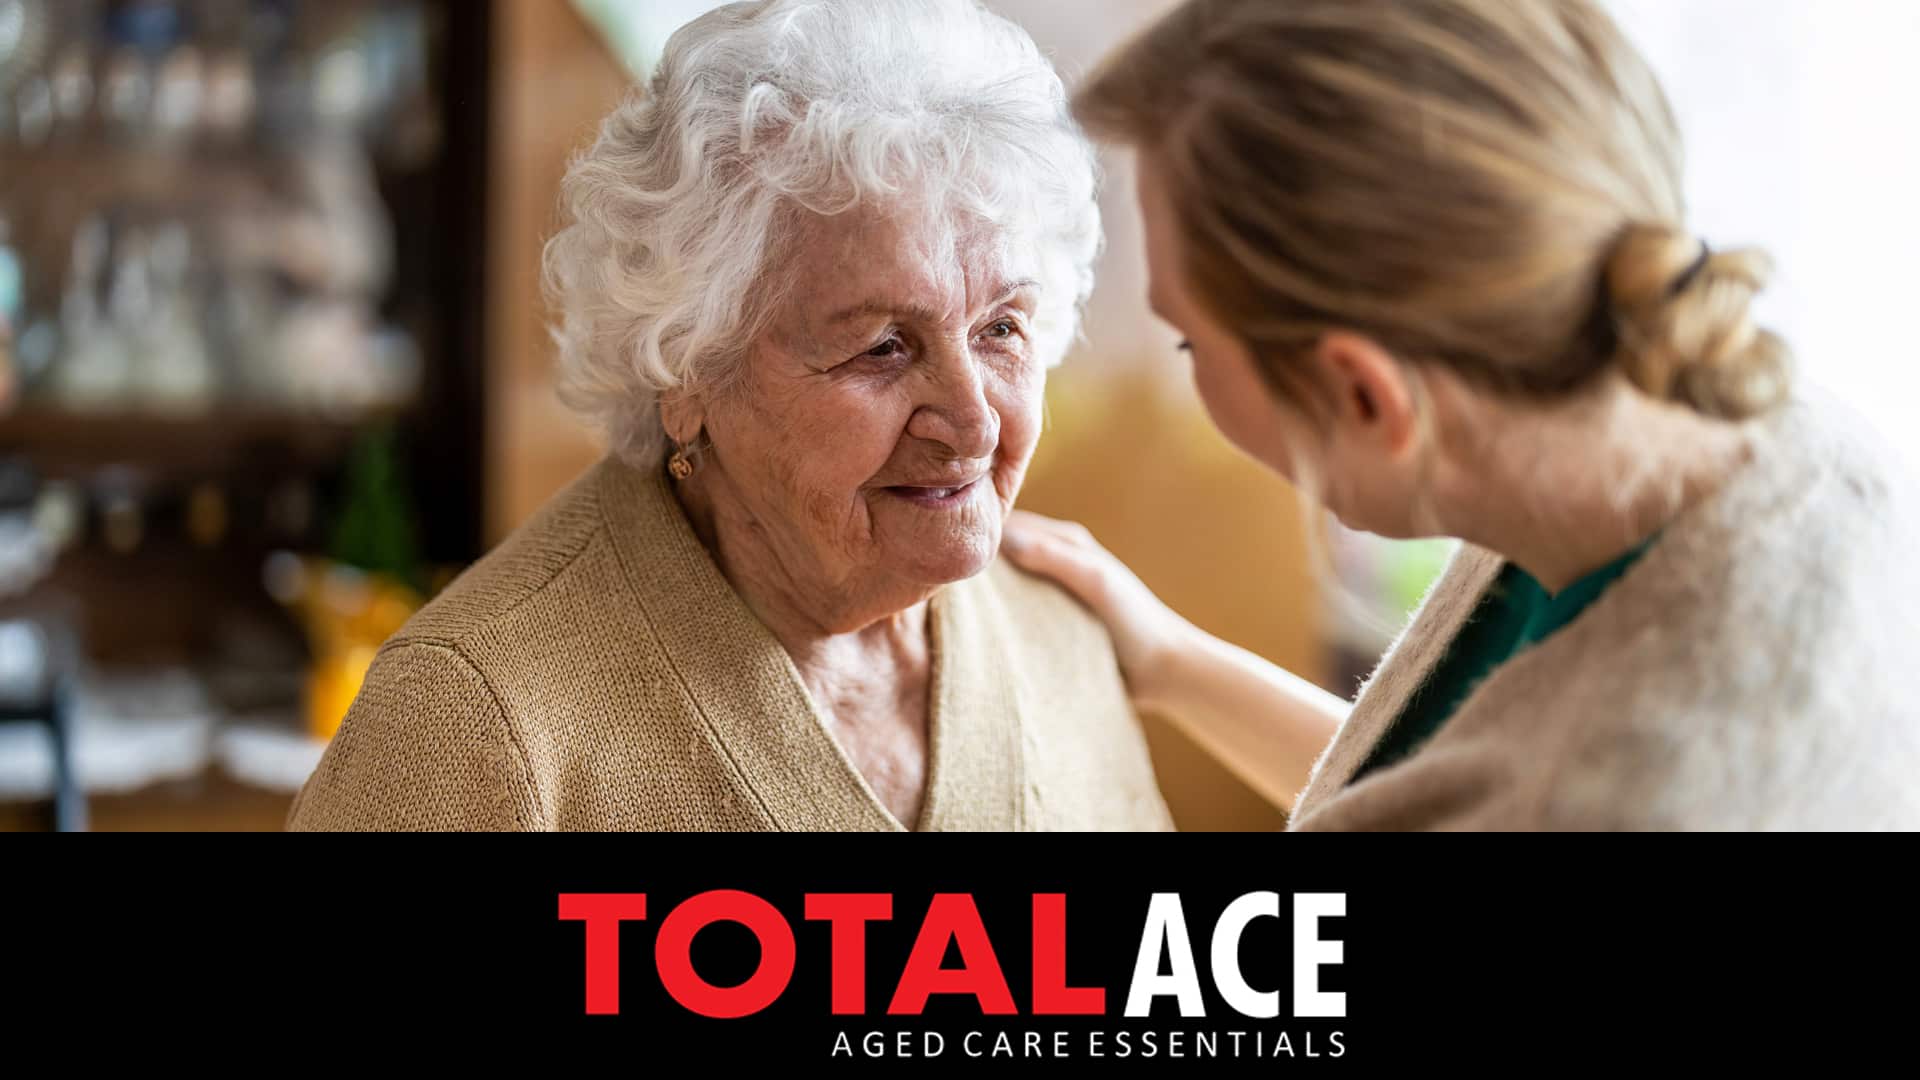 Total Aged Care Essentials | TOTAL ACE